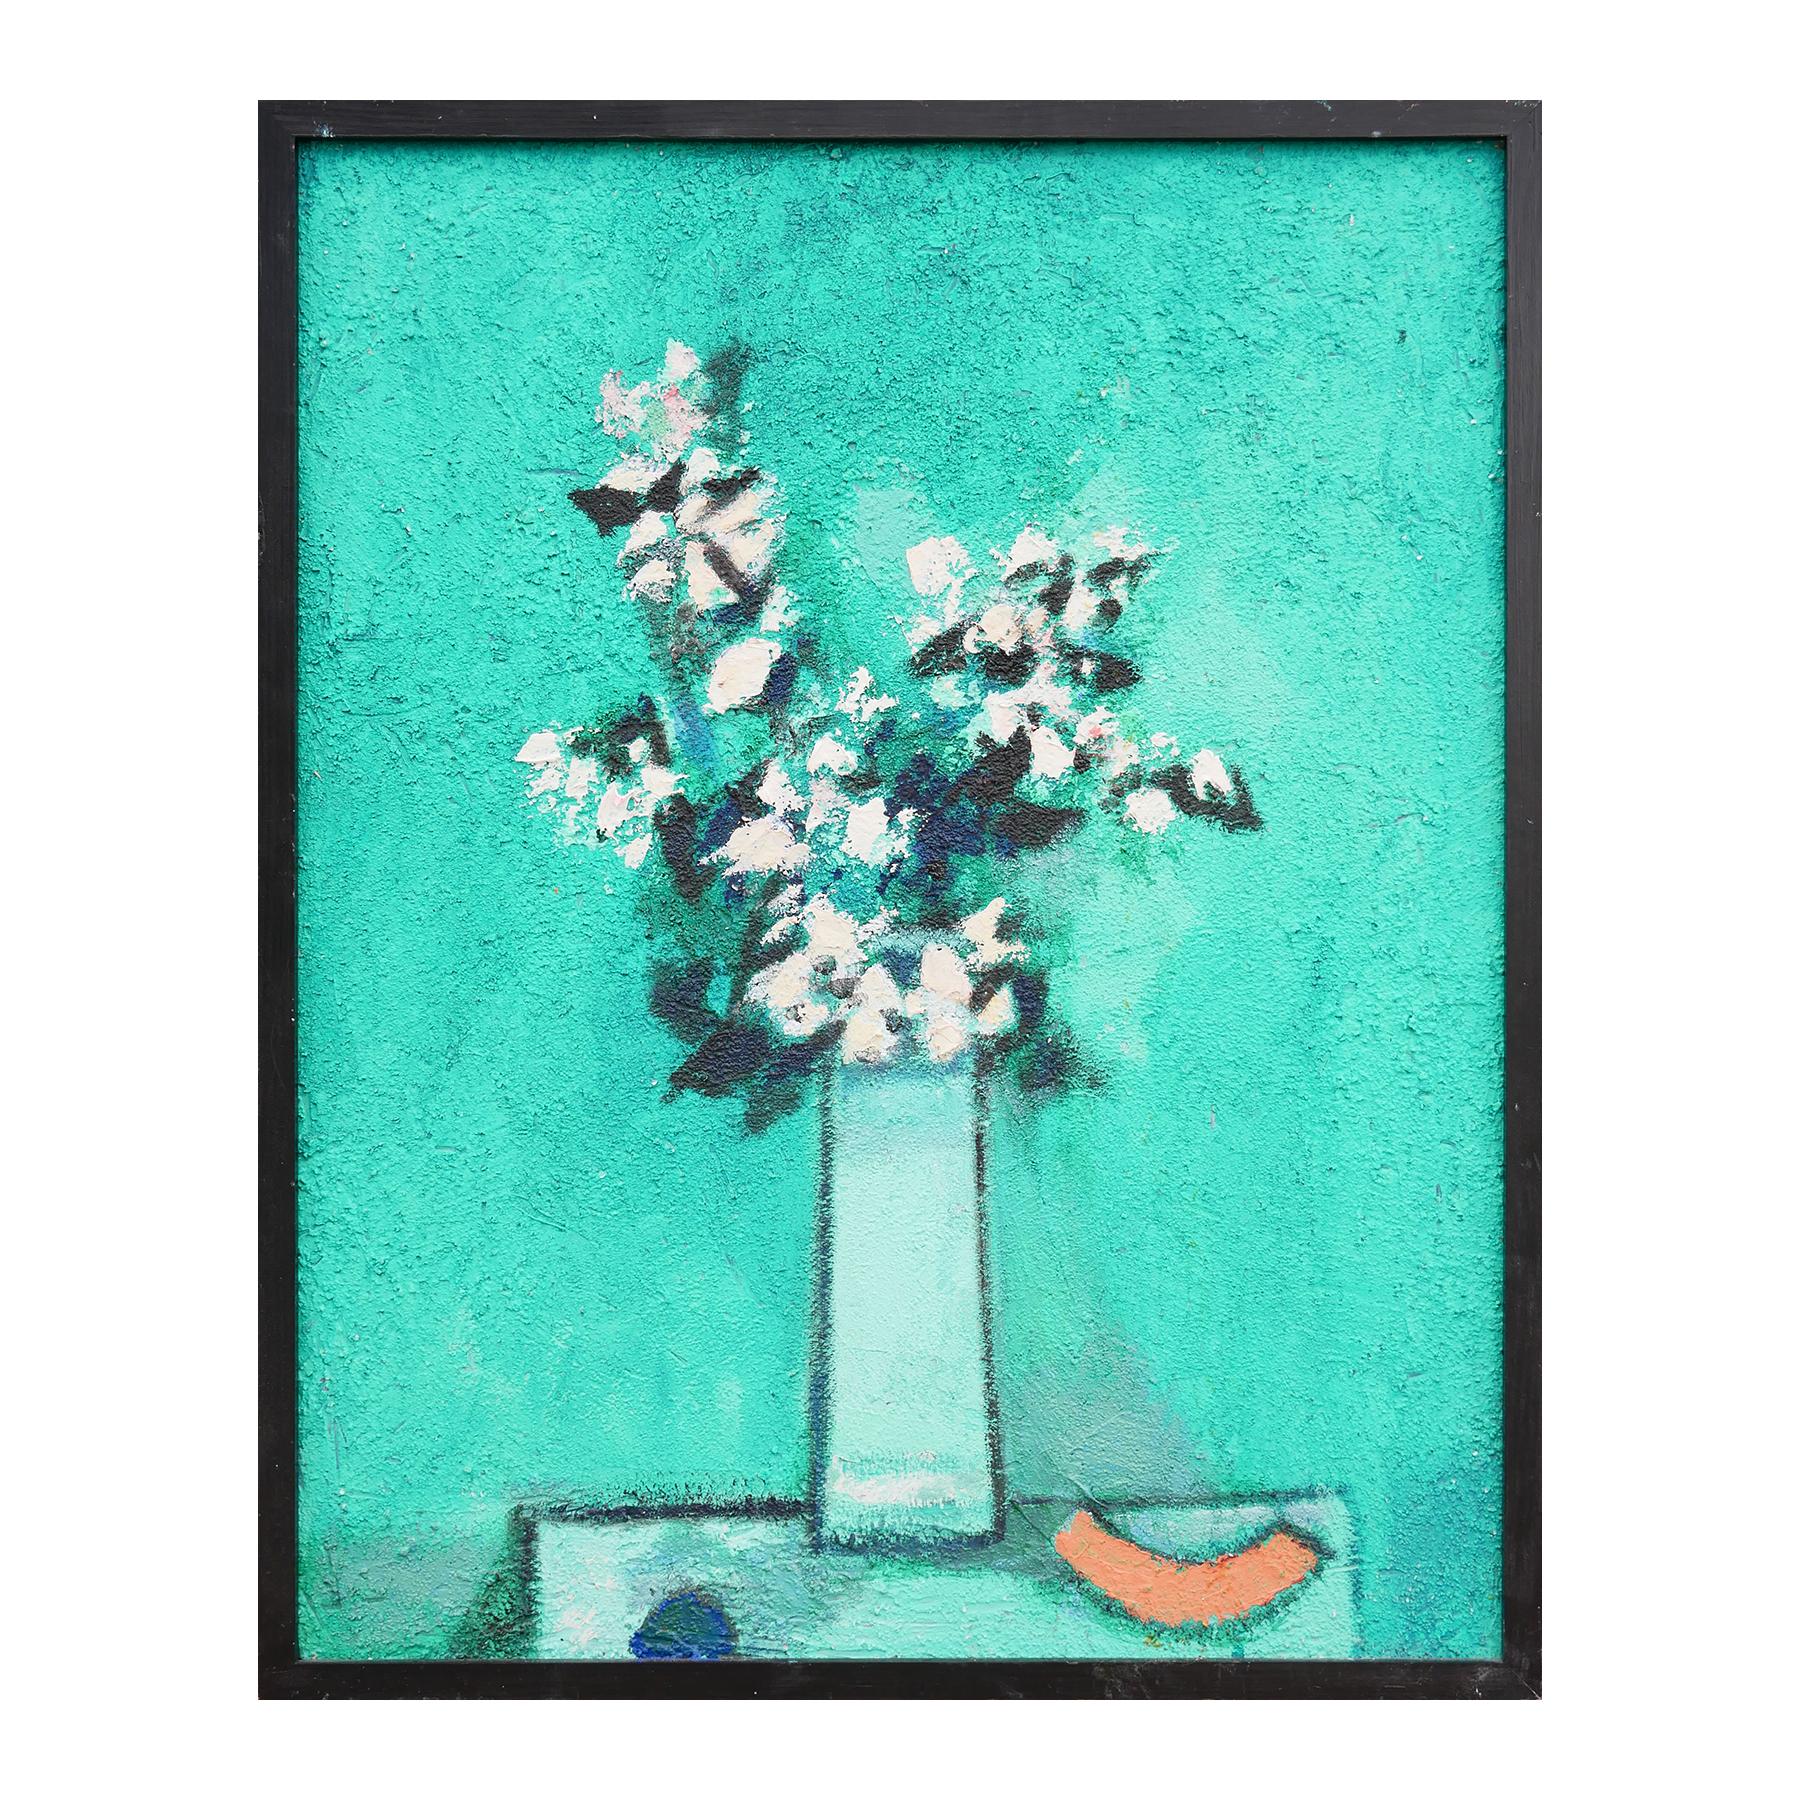 Turquoise abstract still life painting by Houston, TX artist David Adickes. The painting depicts white flowers in a tall blue vase on top of a table with a slice of orange melon. Unsigned. Framed in a simple black frame.

Dimensions Without Frame: H